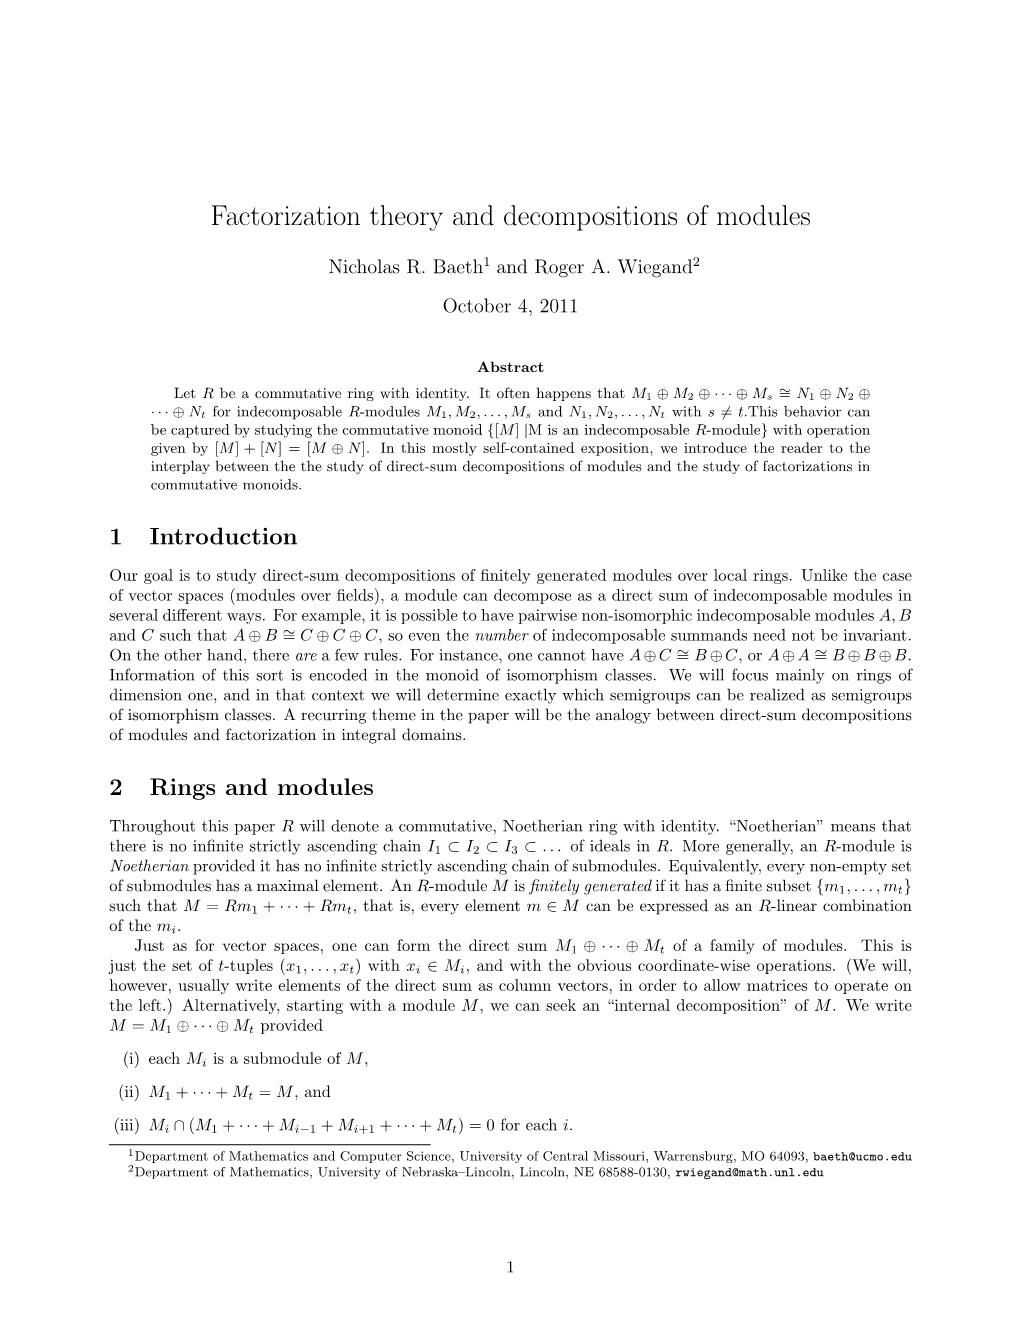 Factorization Theory and Decompositions of Modules